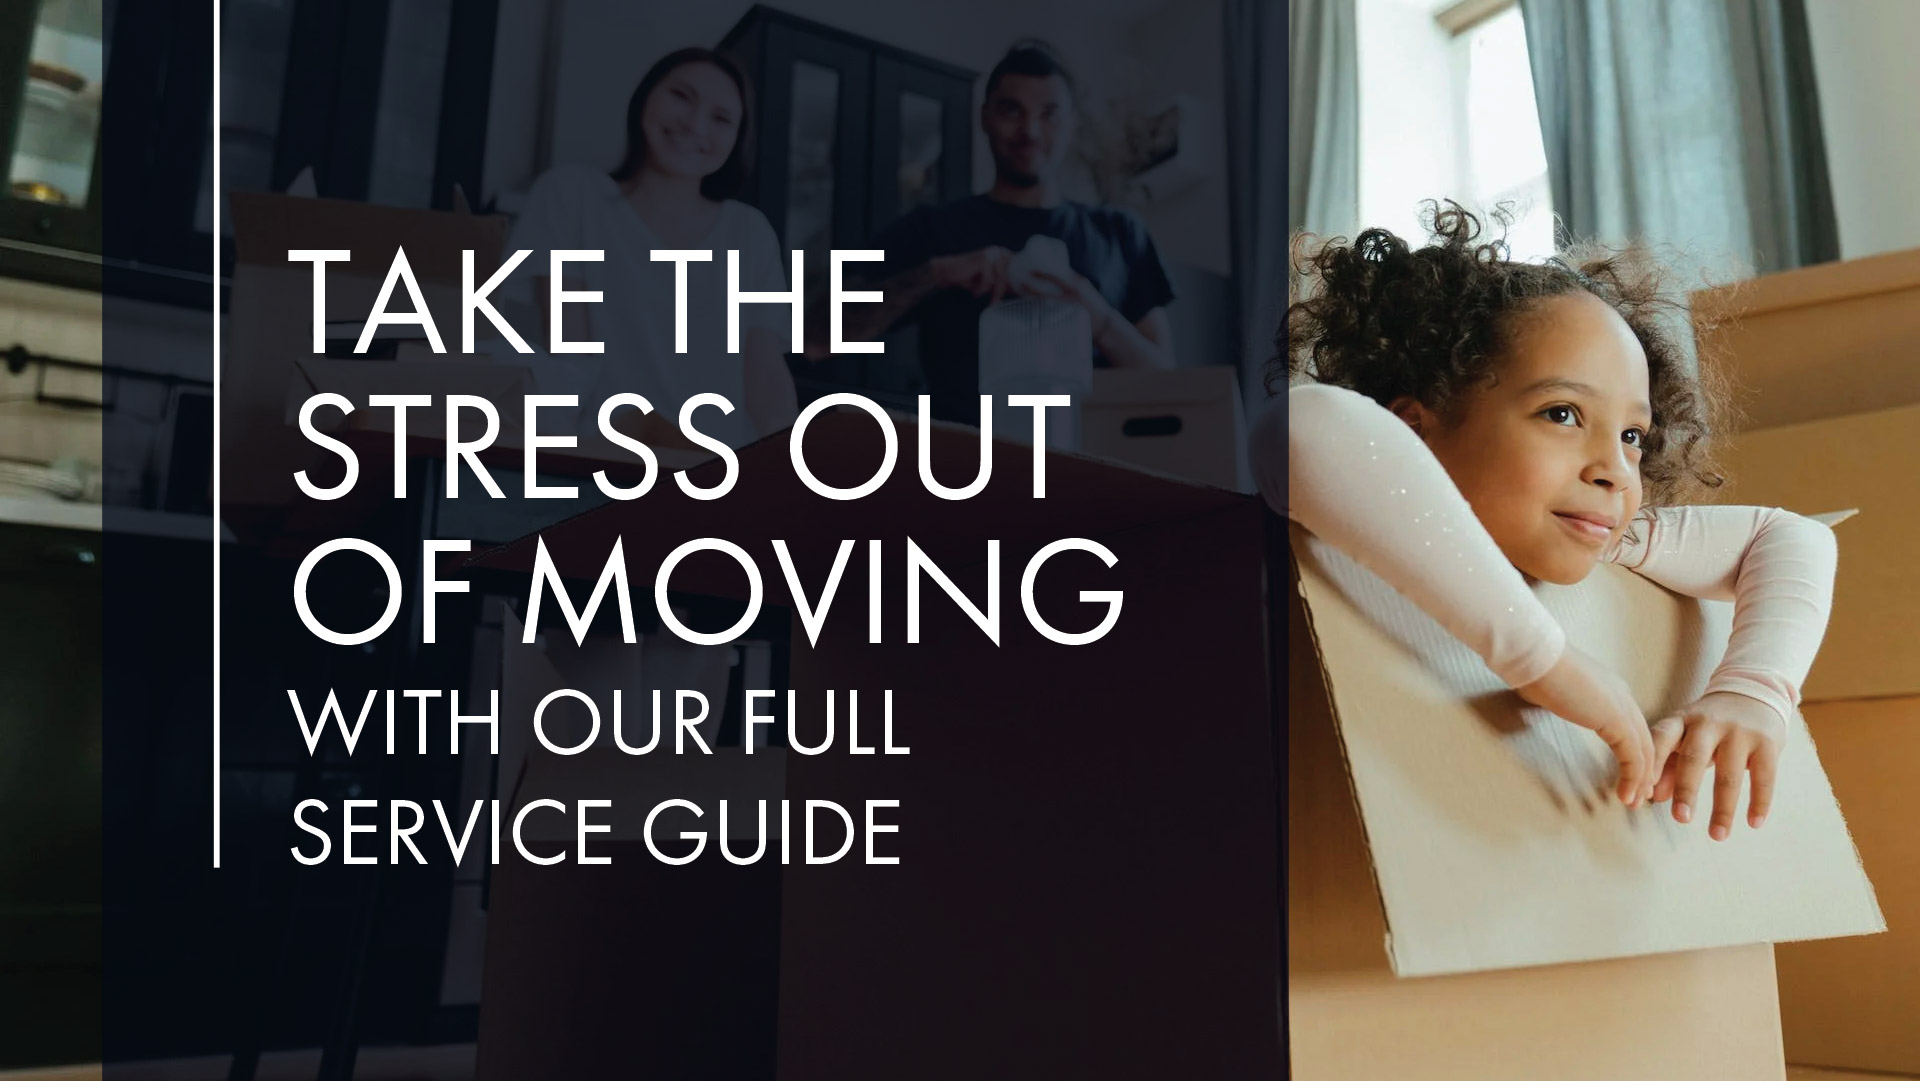 Everything you need to know about creating a stress-free move